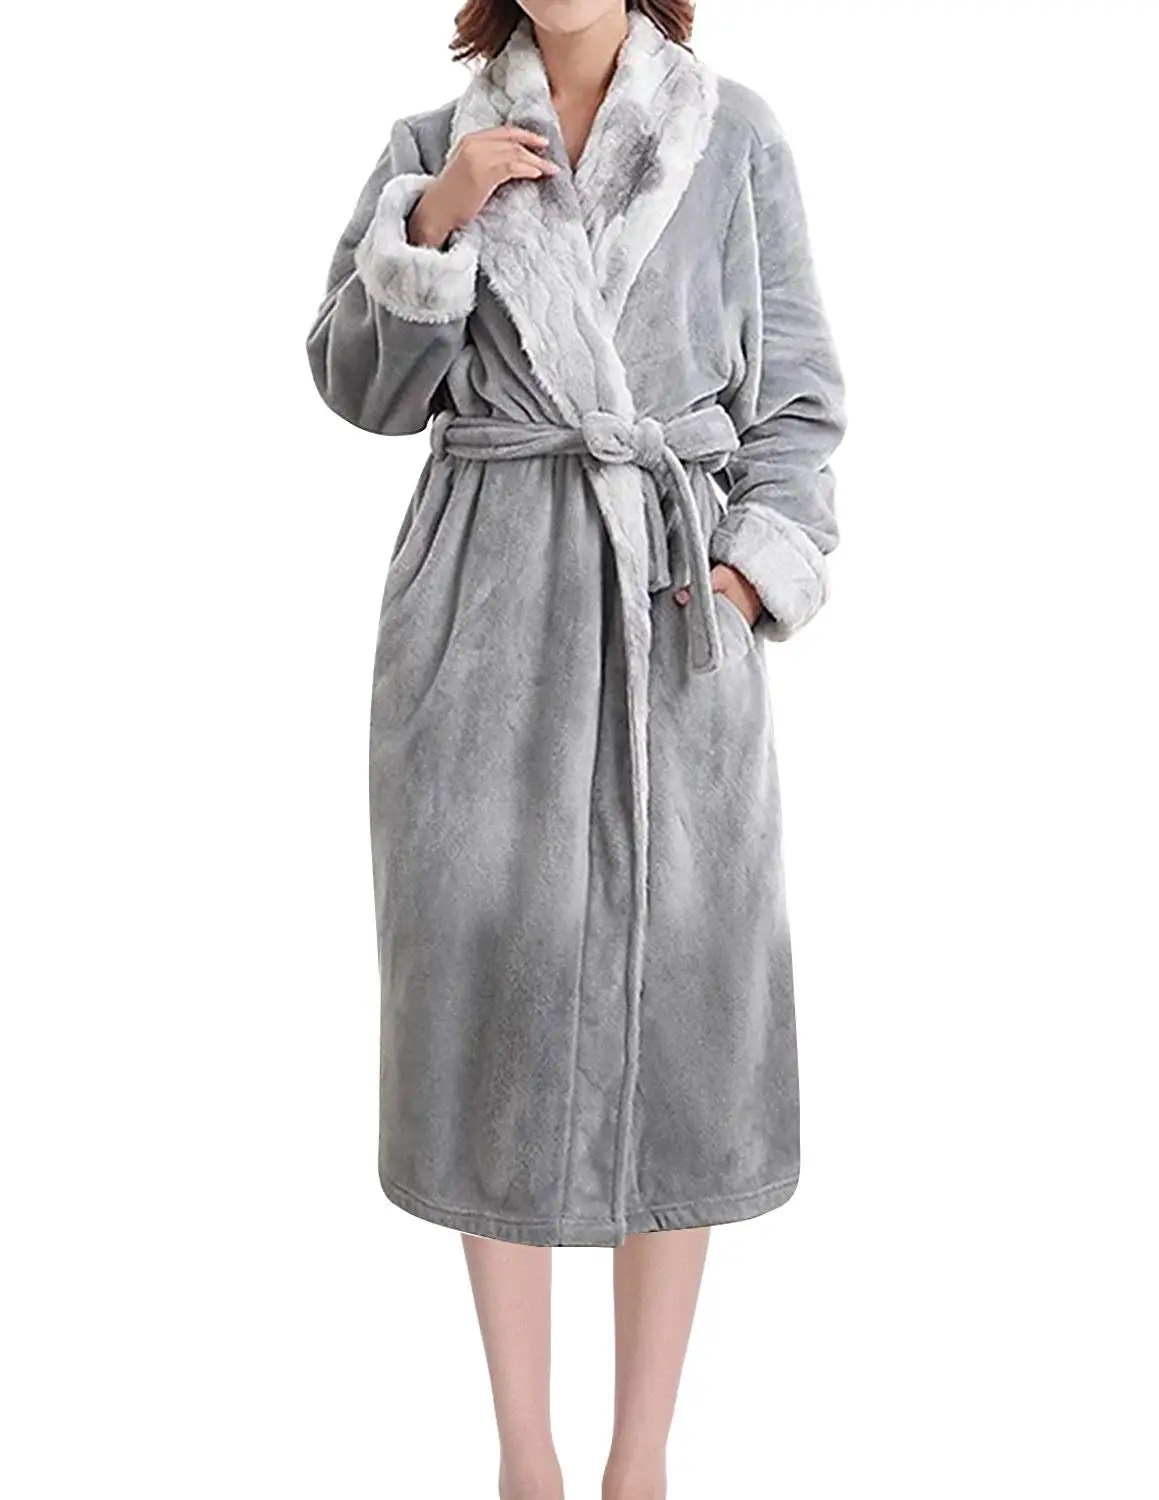 Cheap Fluffy Robe Find Fluffy Robe Deals On Line At